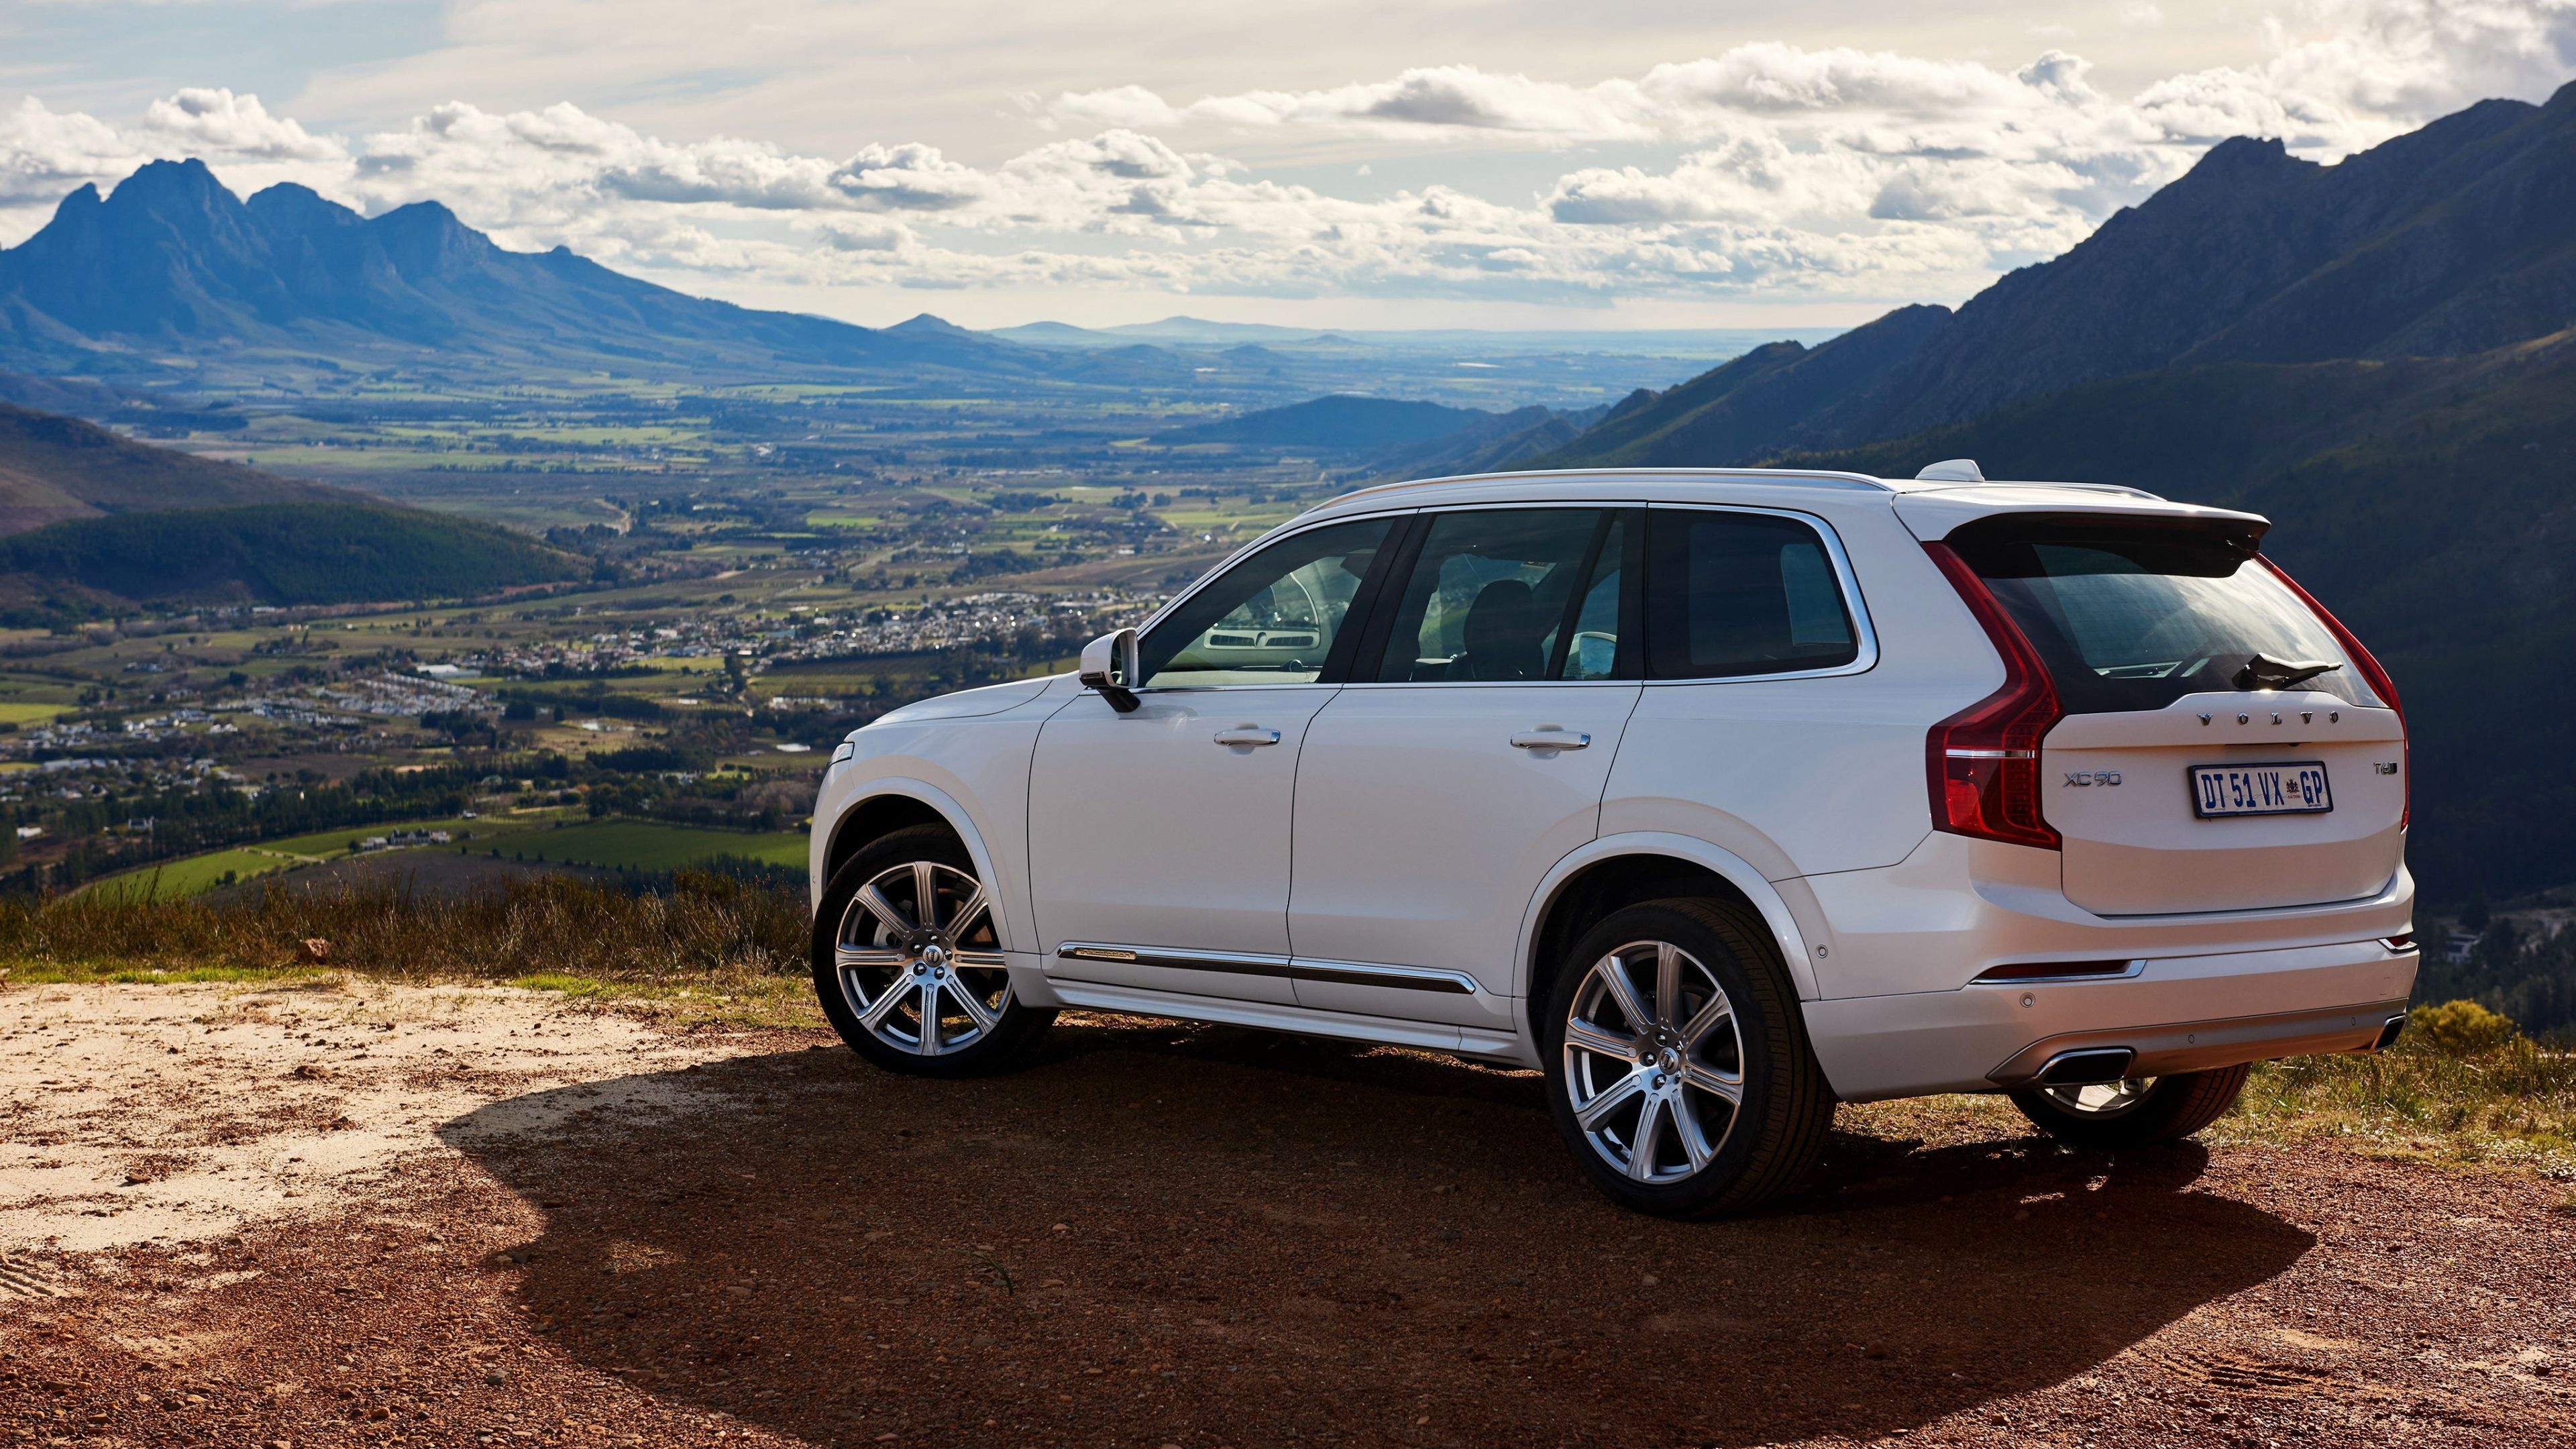 Volvo XC90, Wallpaper collection, High-quality images, Volvo luxury, 3840x2160 4K Desktop